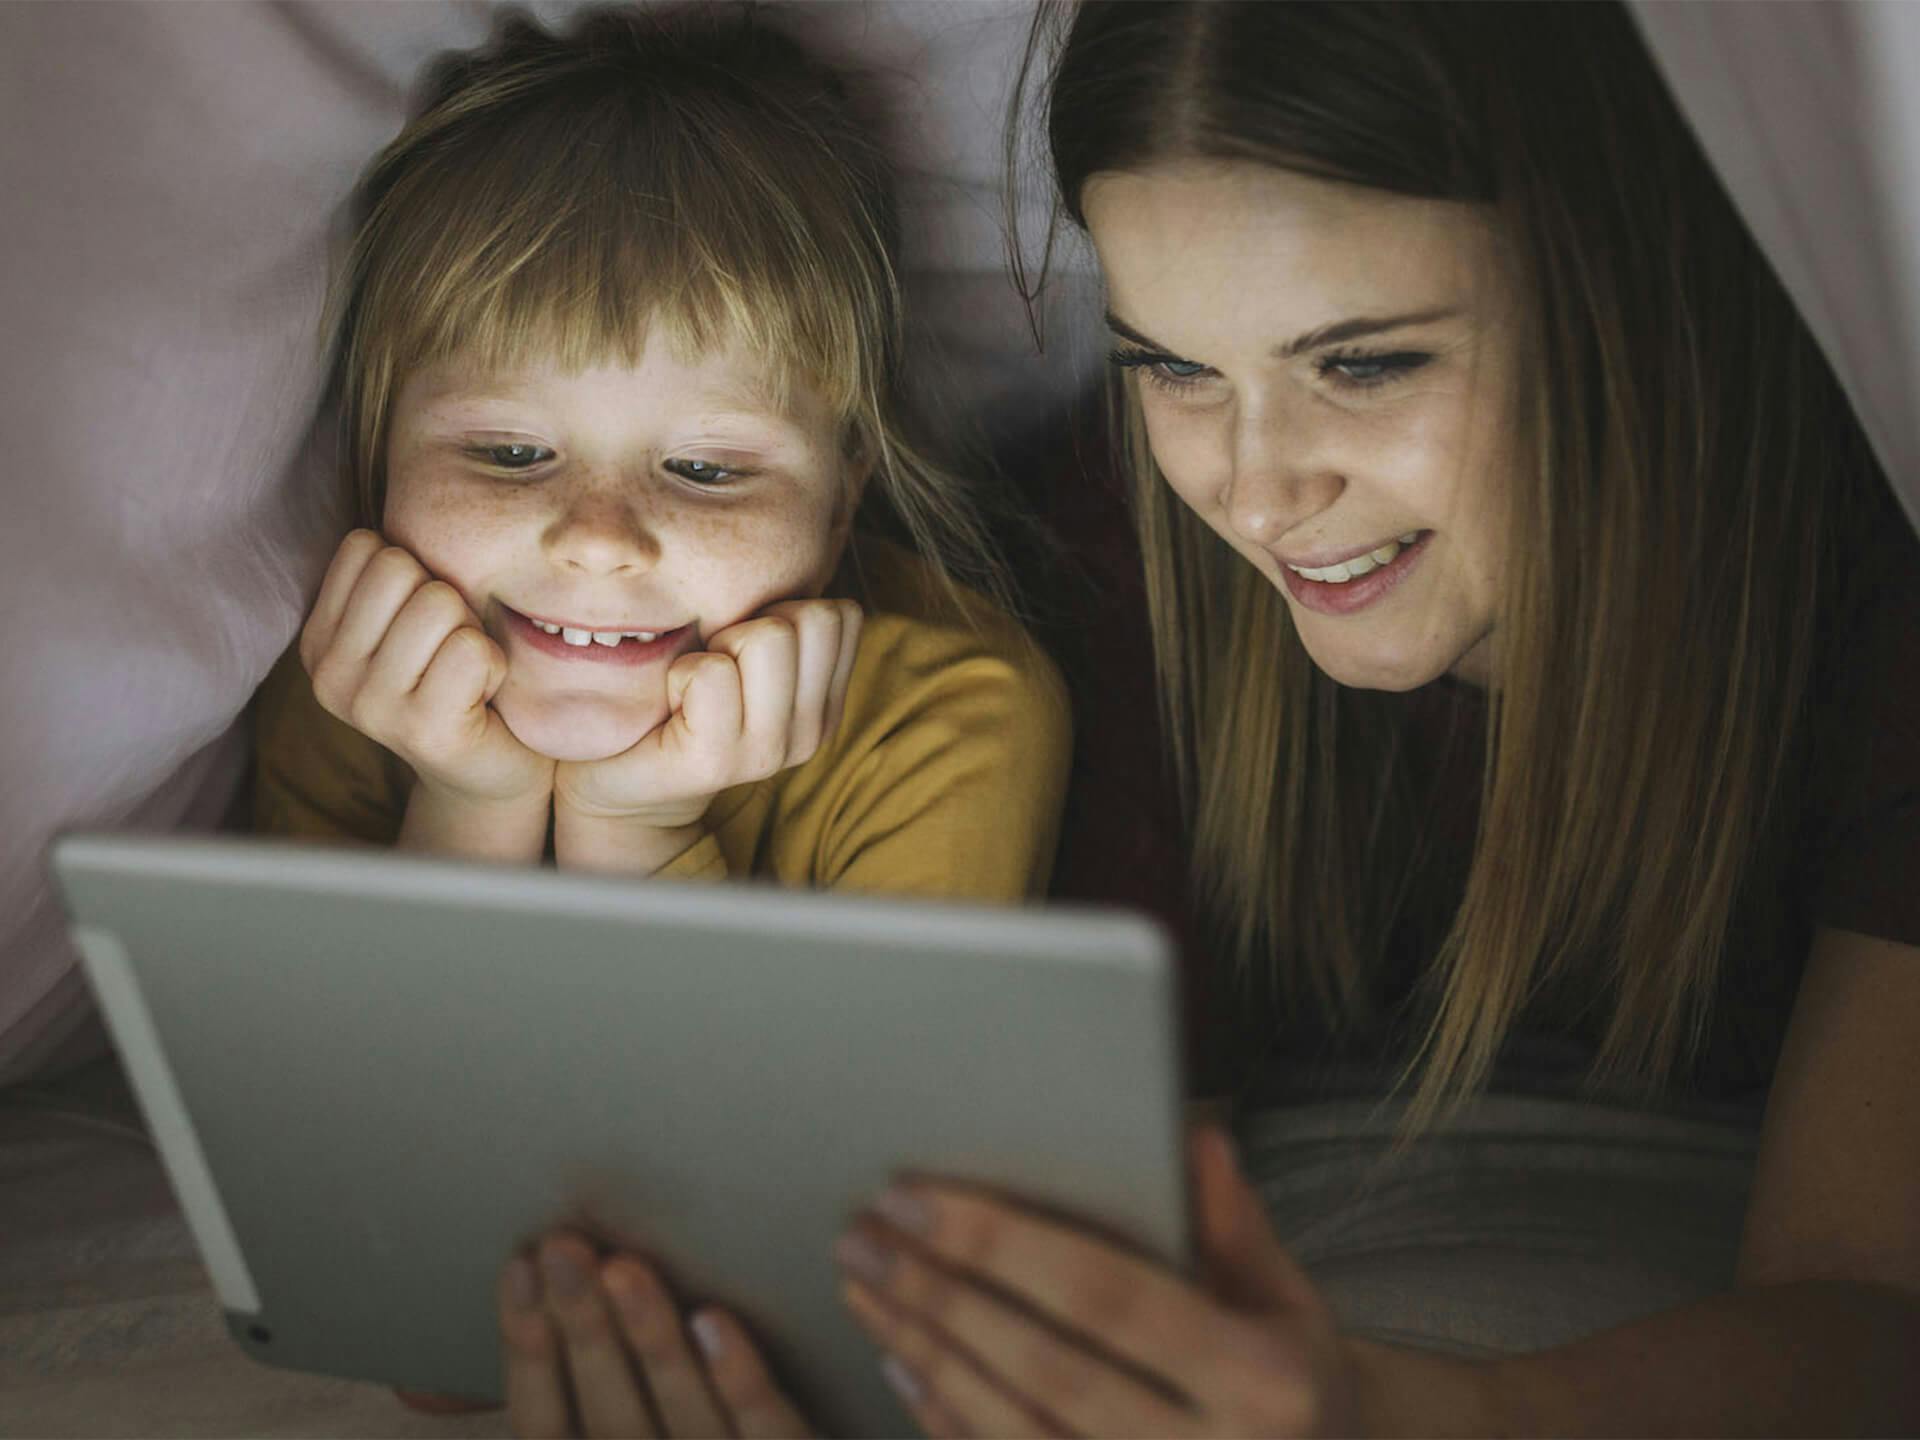 Lifestyle image of a mom and child looking at an Ipad underneath the blankets